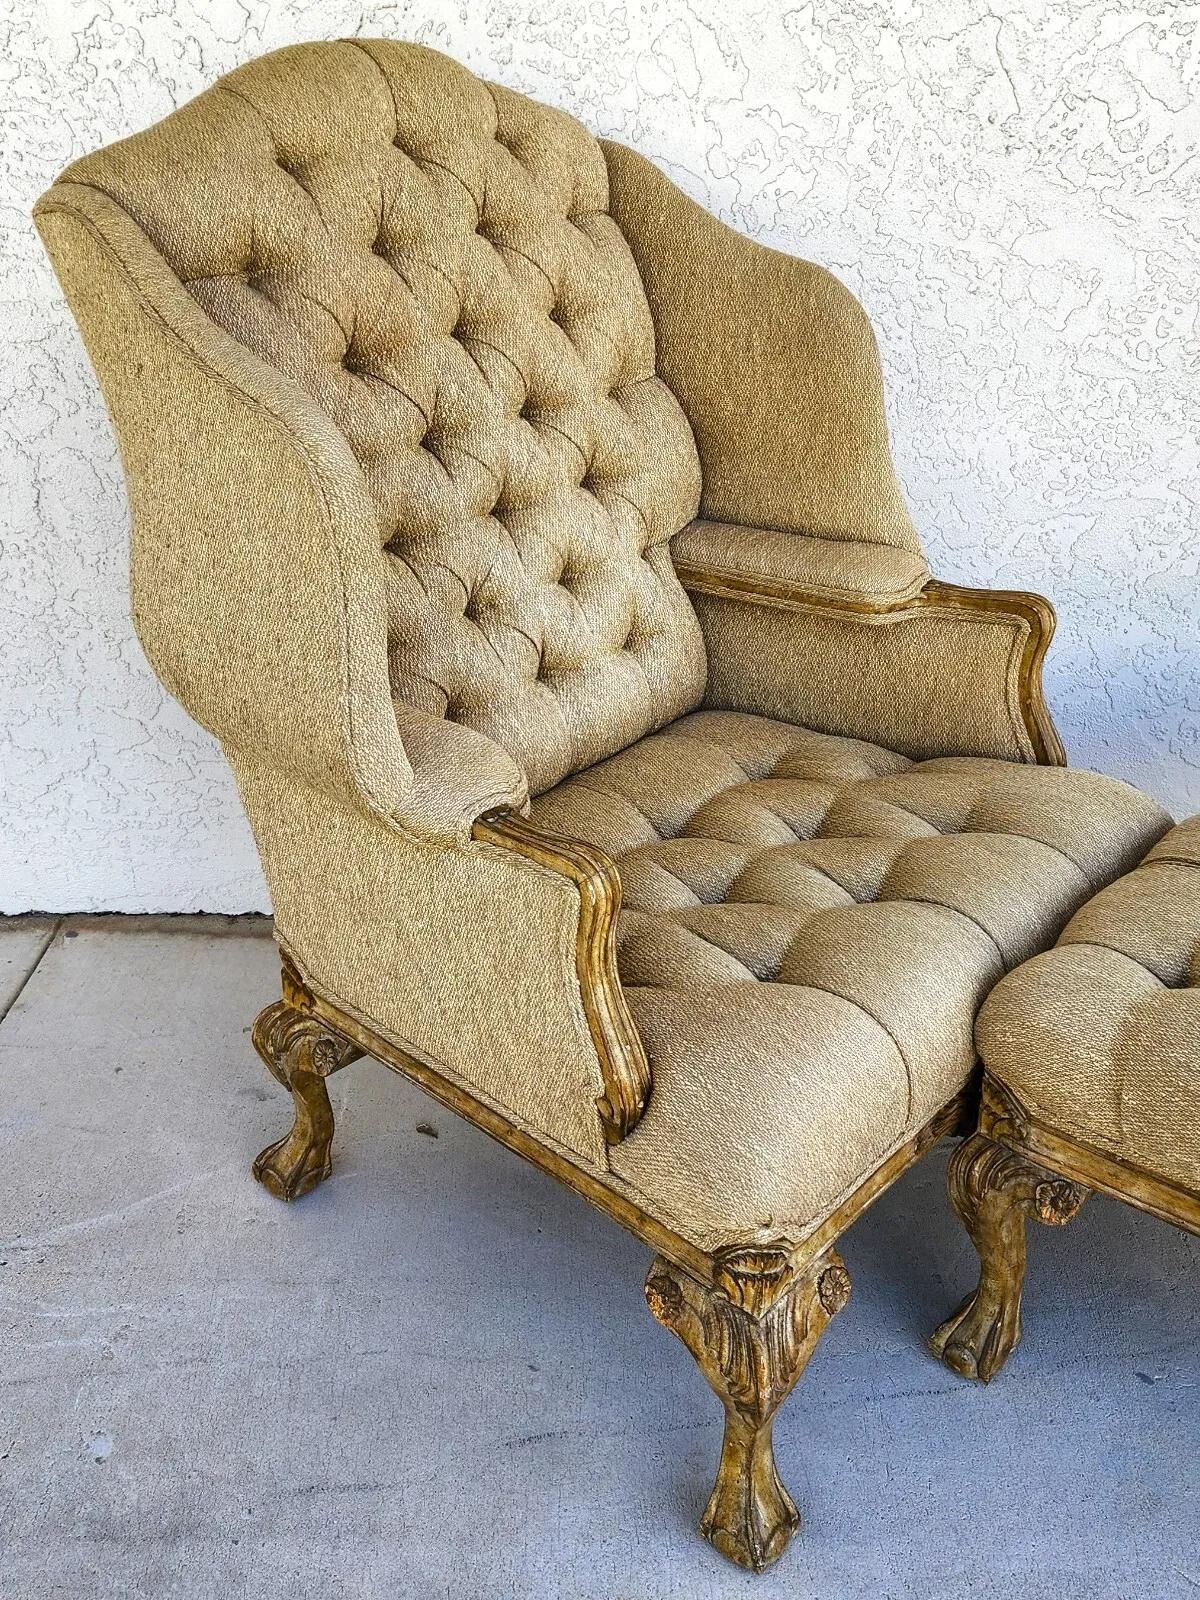 For FULL item description click on CONTINUE READING at the bottom of this page.

Offering One Of Our Recent Palm Beach Estate Fine Furniture Acquisitions Of A
French Louis XV Style Wingback Chair & Ottoman Set

Approximate Measurements in